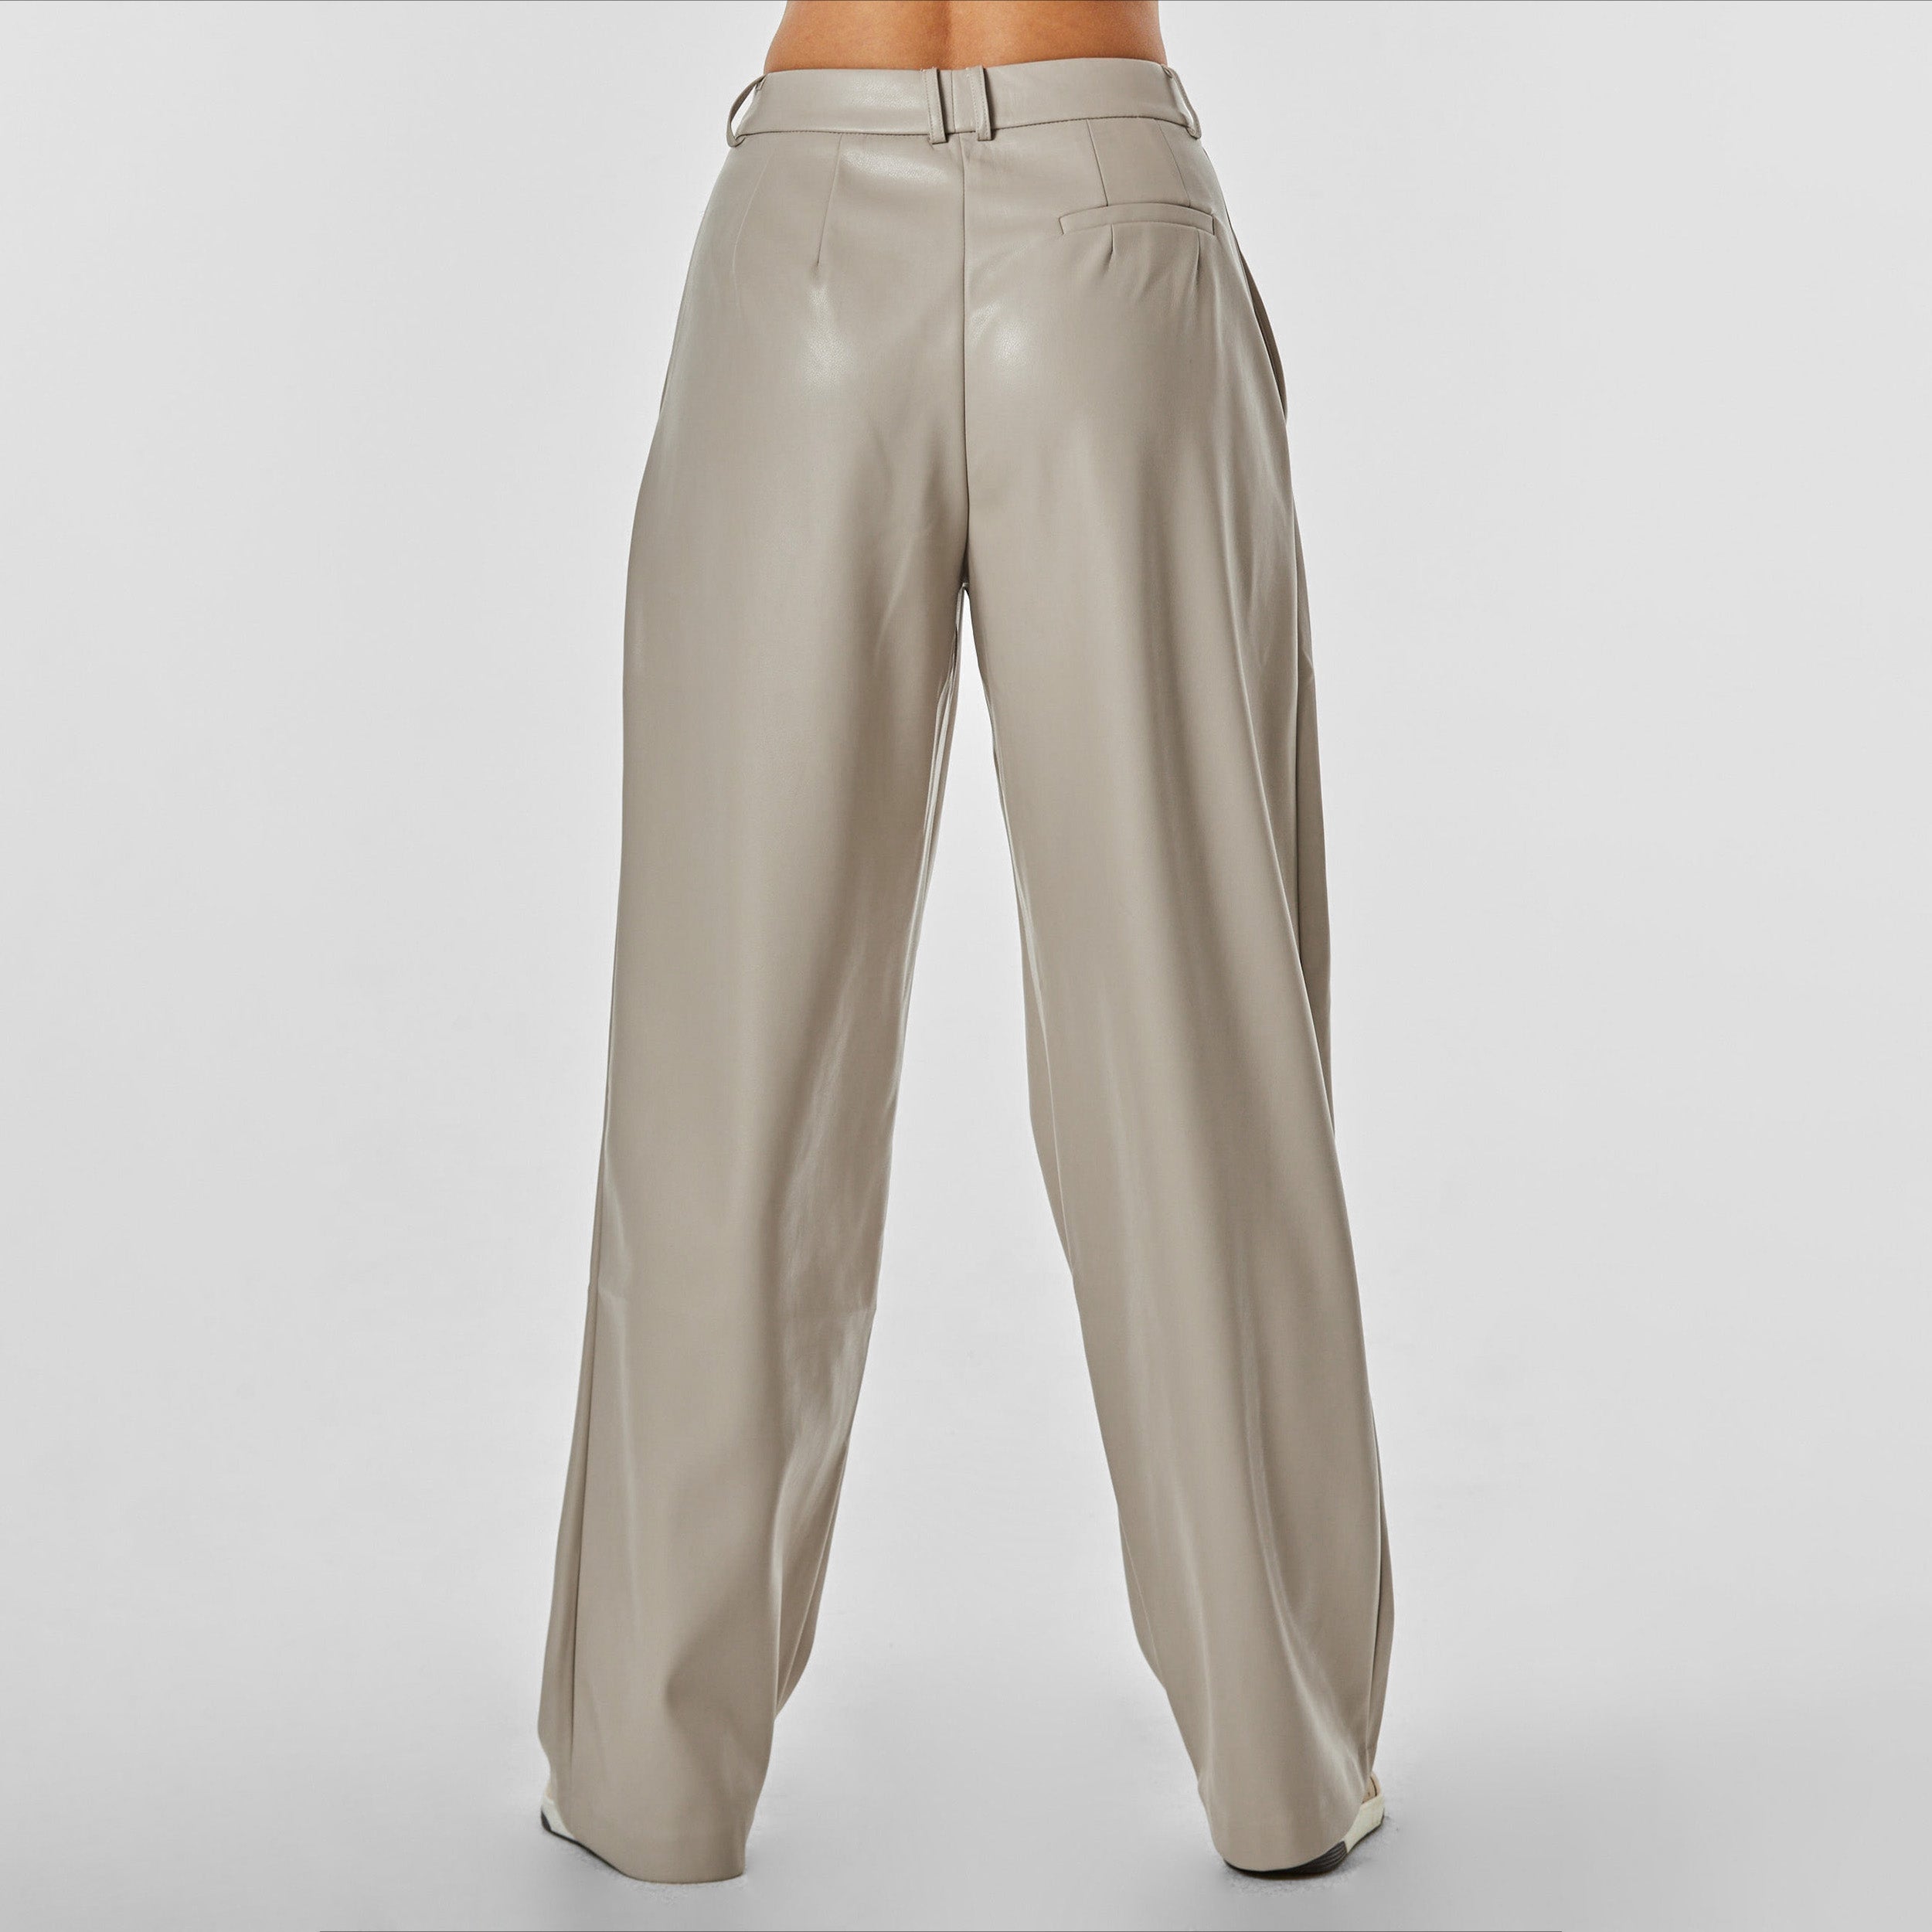 Rear view of woman wearing beige colored high rise vegan leather pleated trousers.